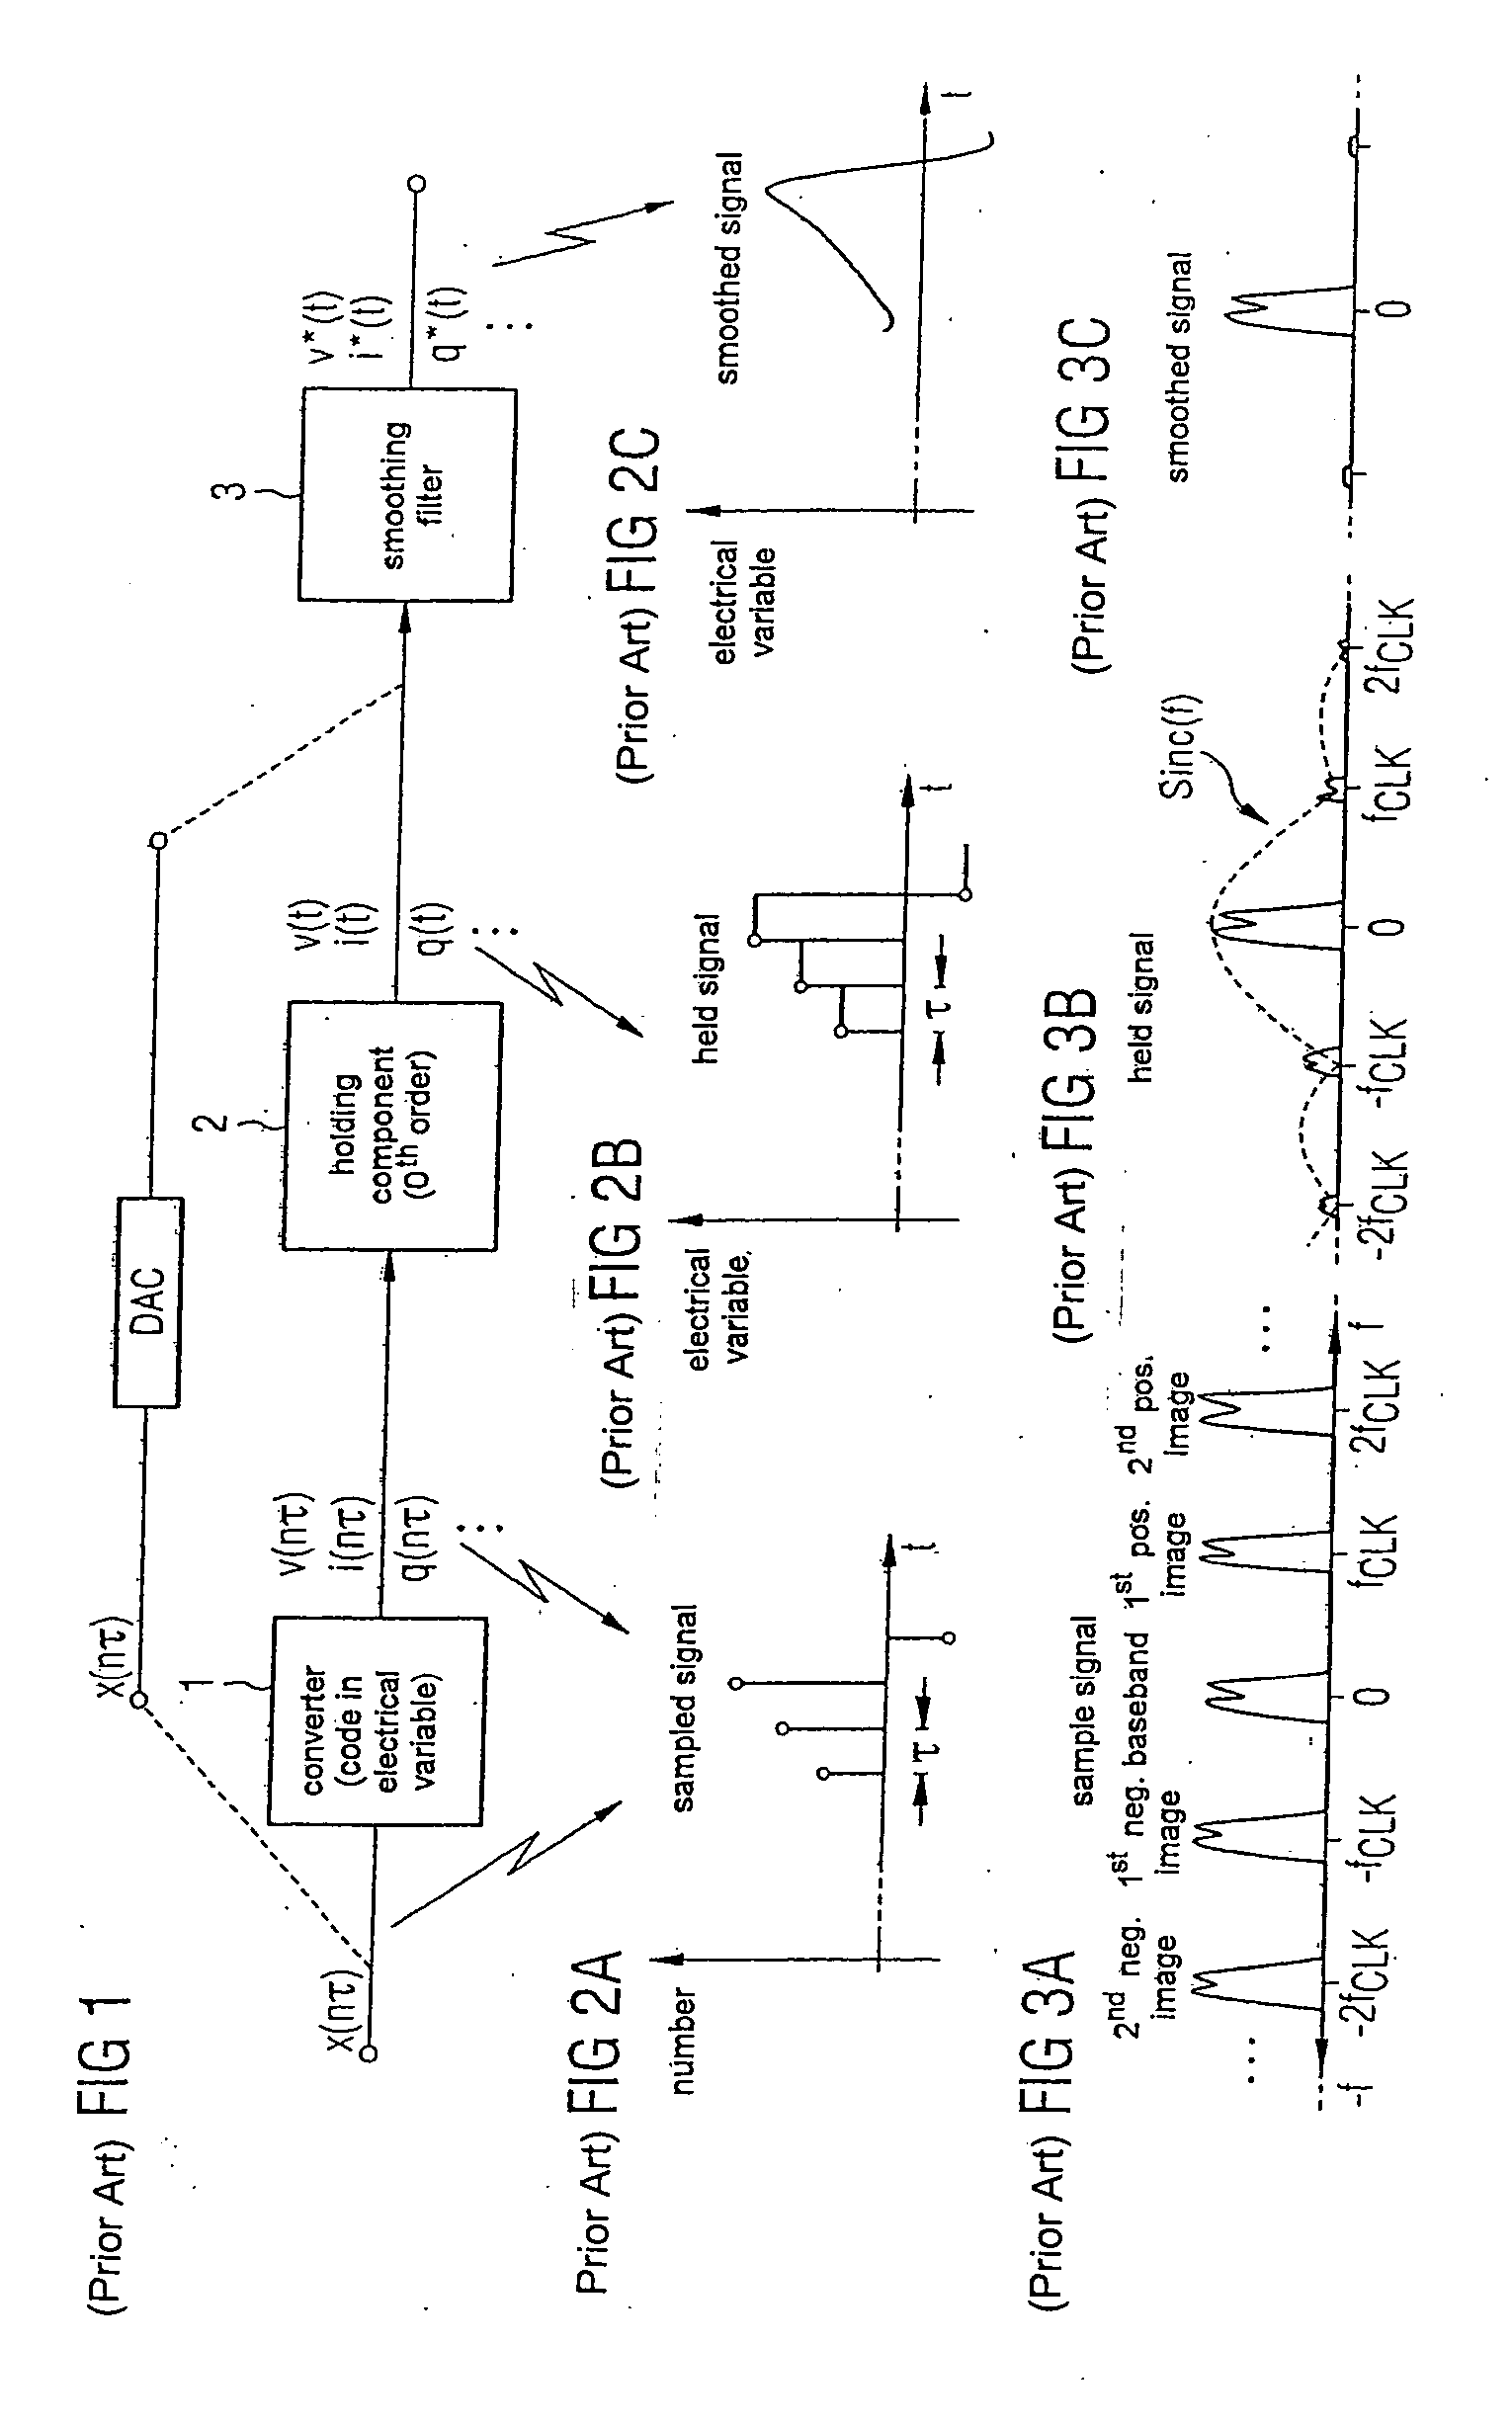 Method and device for reducing the signal images at the output of a digital/analogue converter